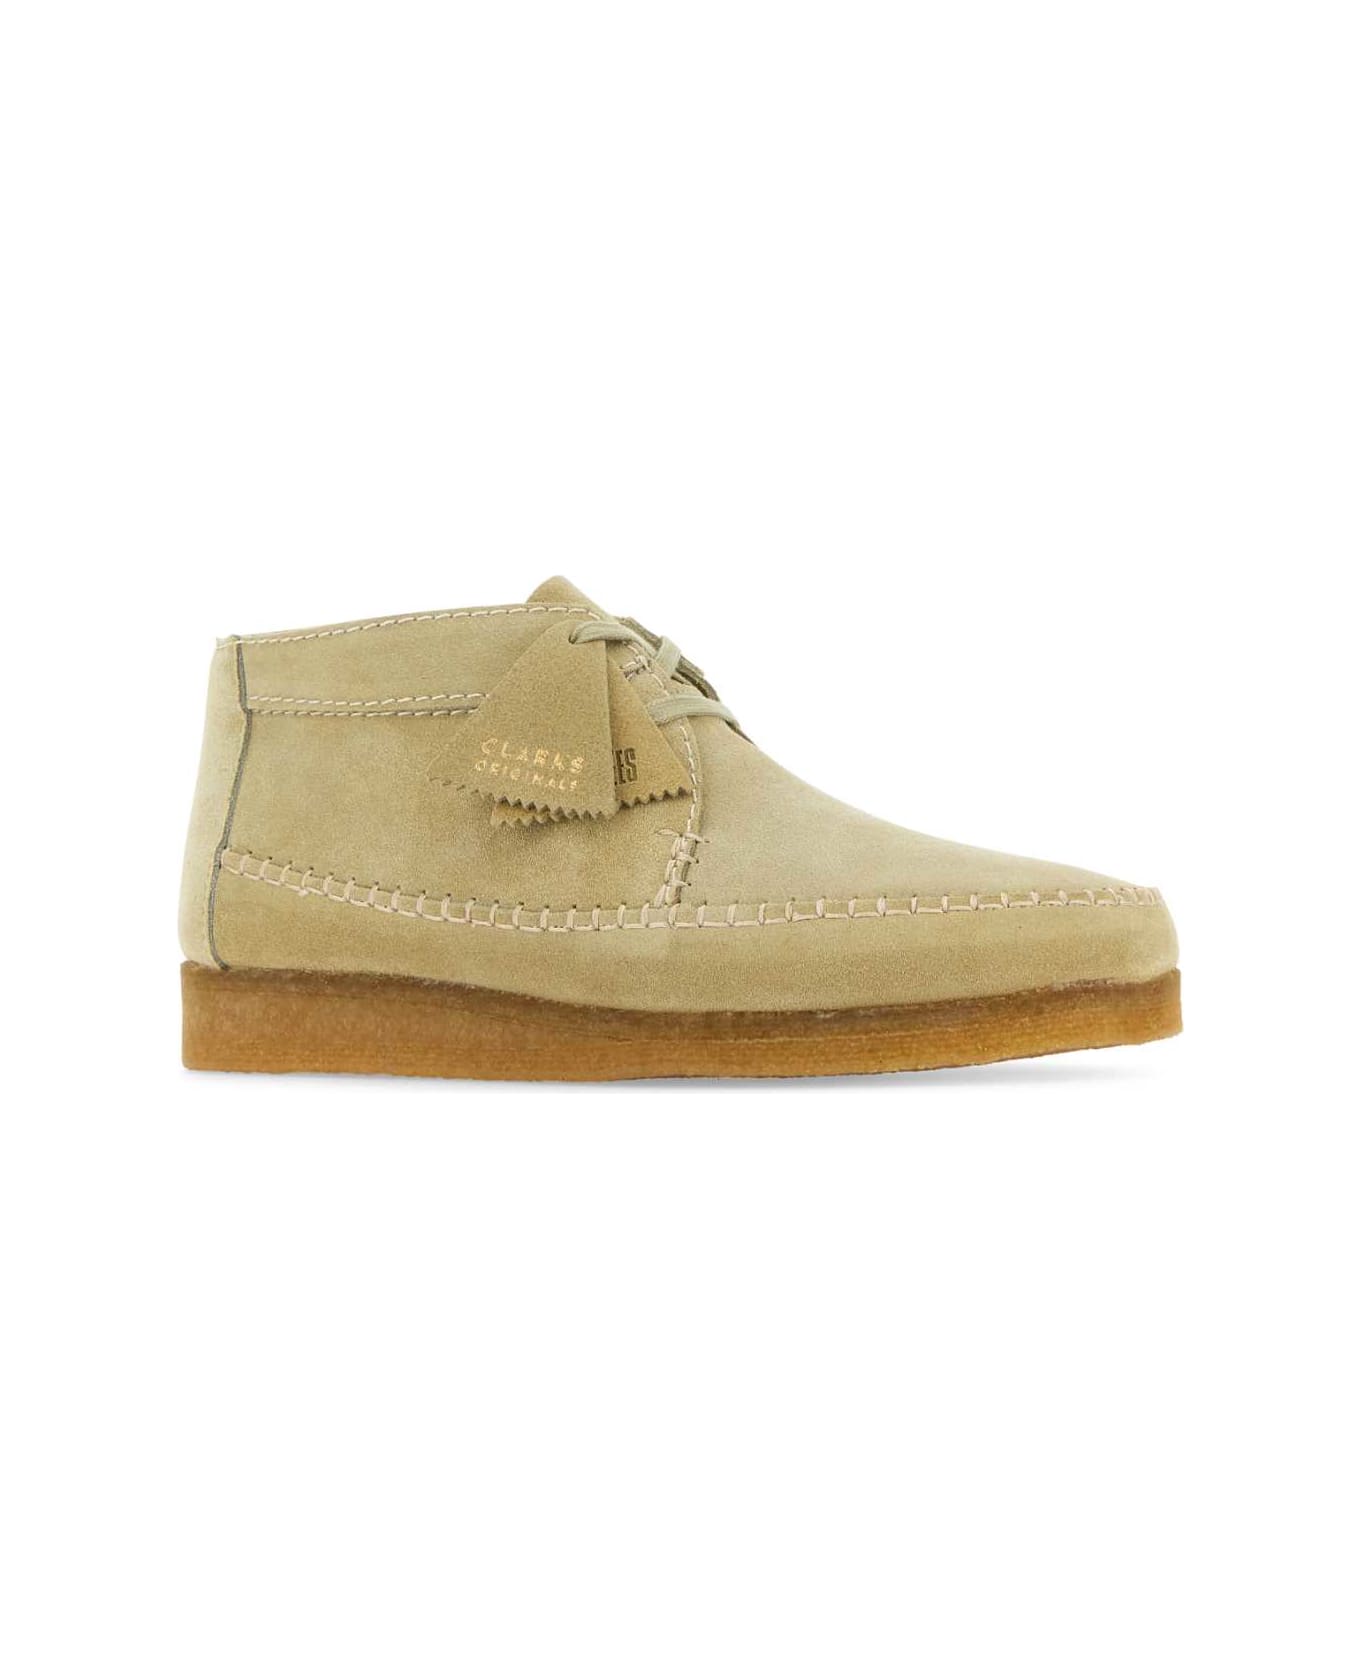 Clarks Beige Suede Weaver Ankle Boots - MAPLESUEDE ローファー＆デッキシューズ